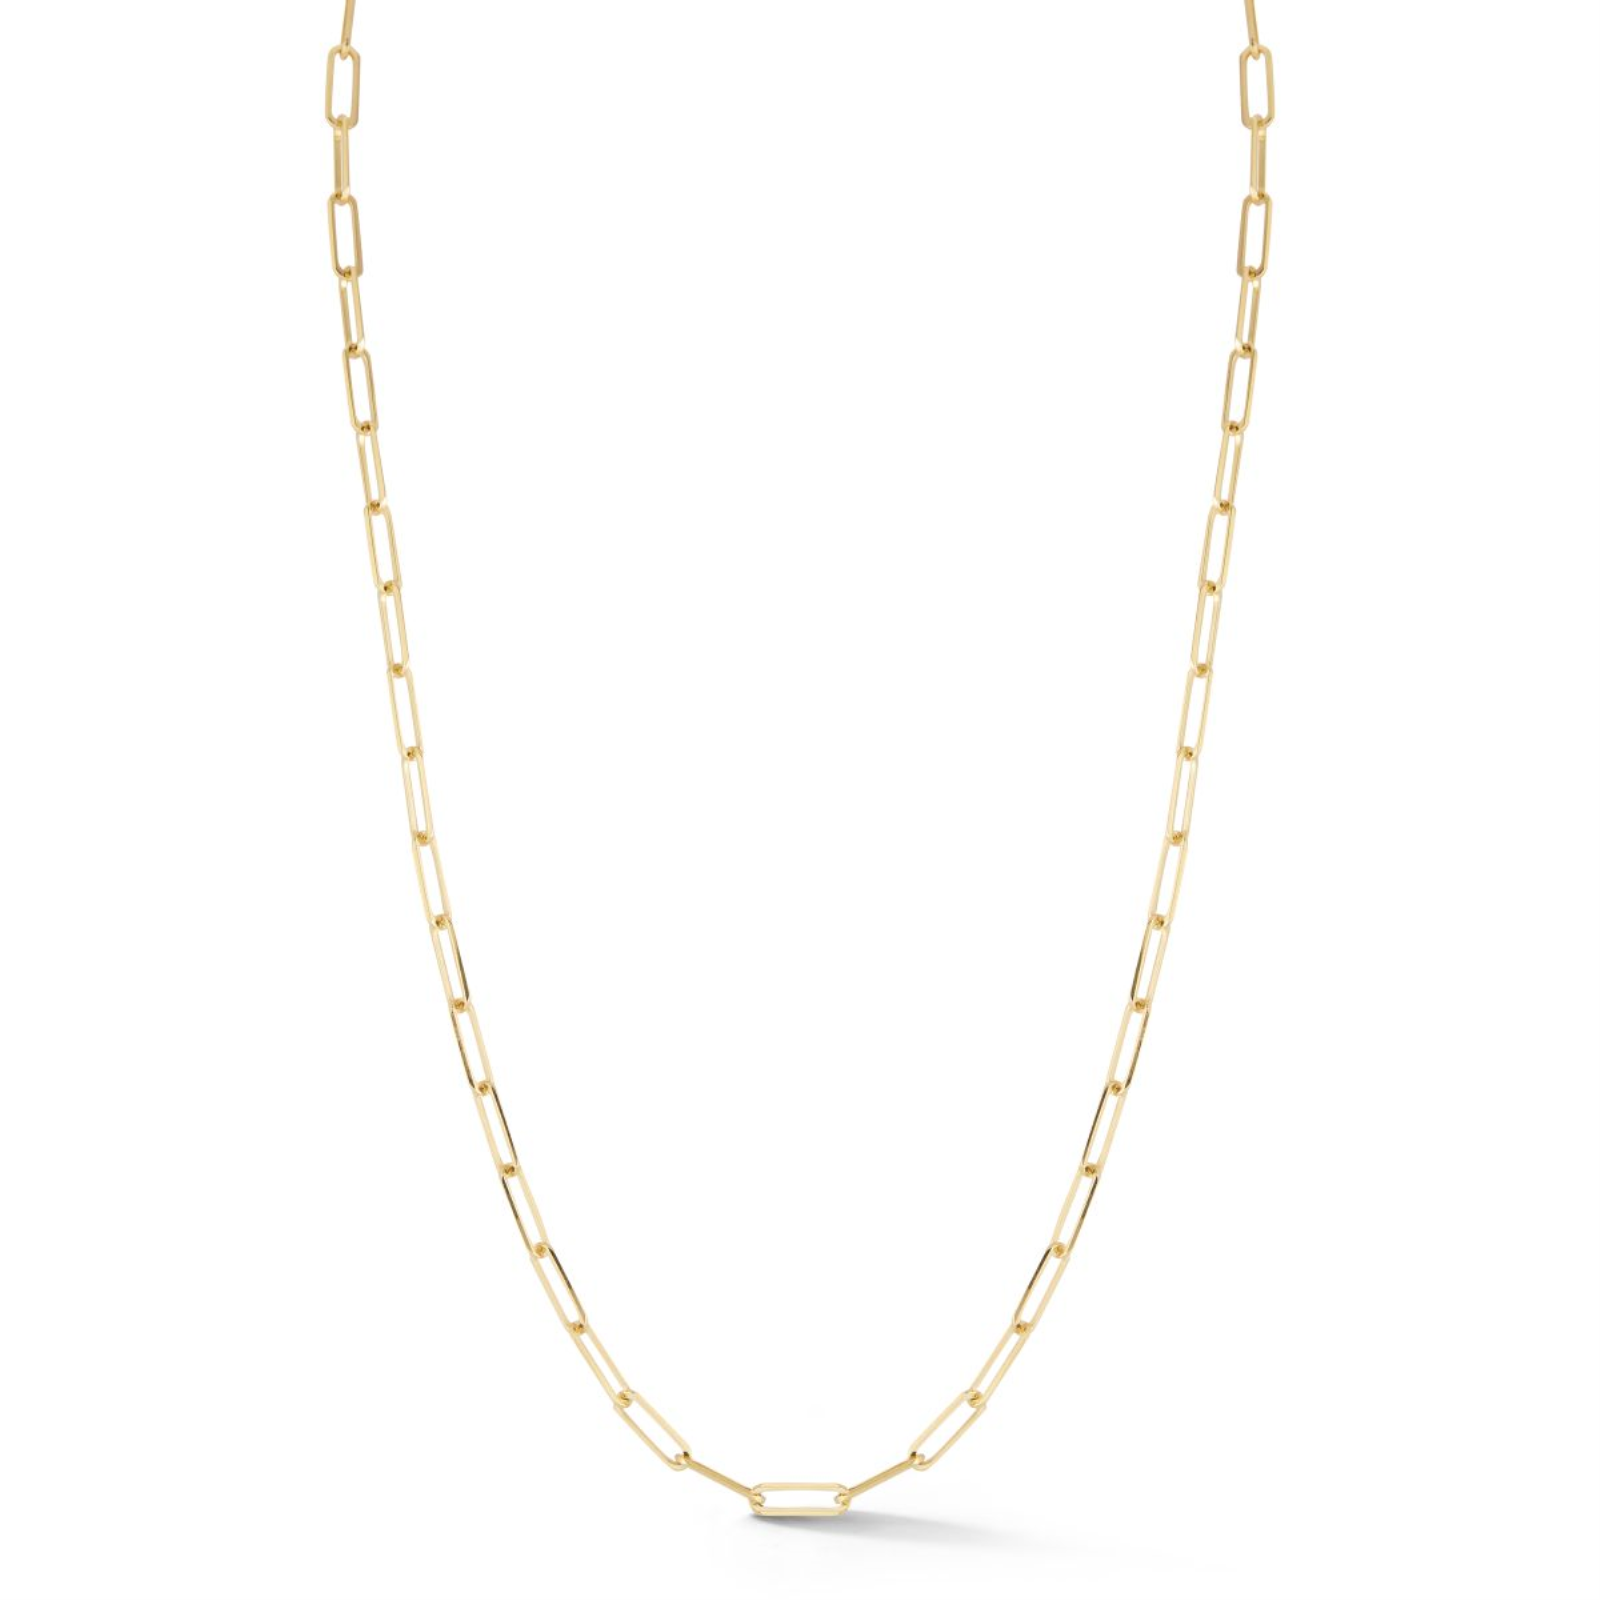 GOLD BETTY CHAIN NECKLACE